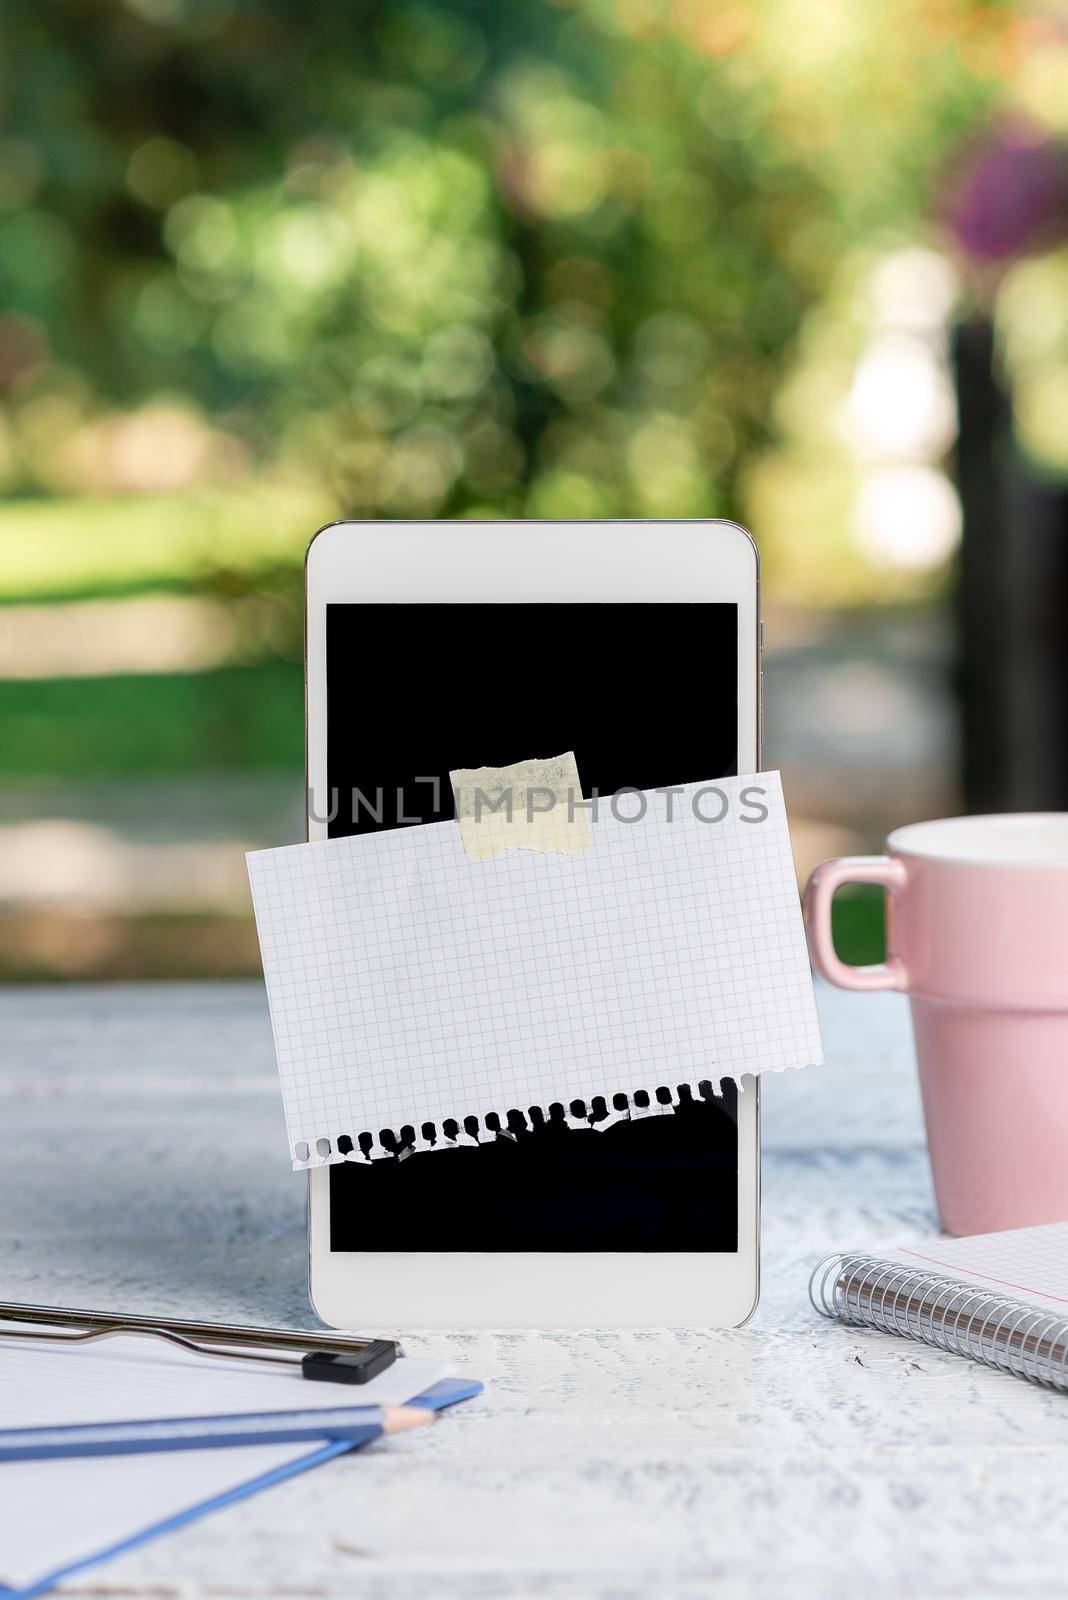 Abstract Outdoor Smartphone Photography, Displaying New Device, Garden Coffee Shop Ideas, Relaxation Experience, Embracing Nature, Fresh Warm Climate, Phone Calls by nialowwa